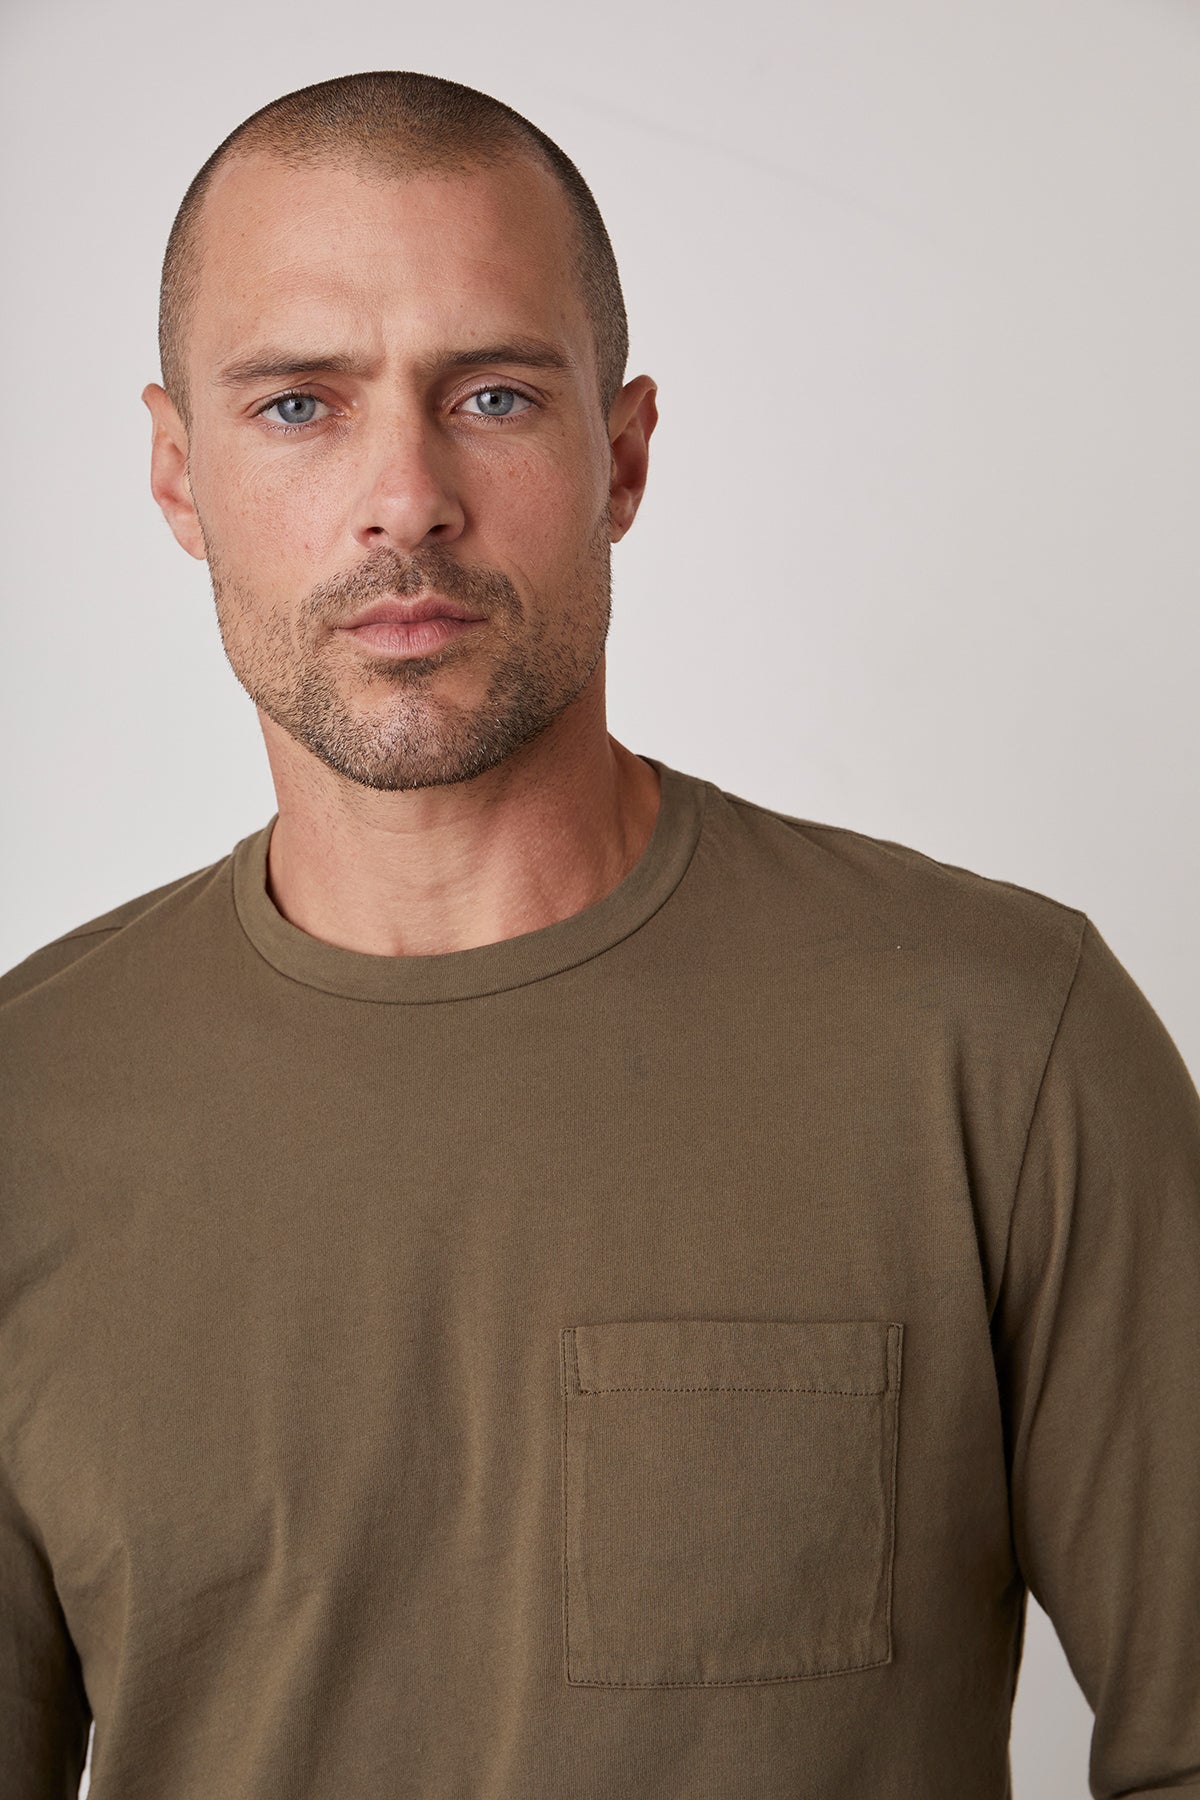   Oliver Tee Amazon Front Pocket Detail 